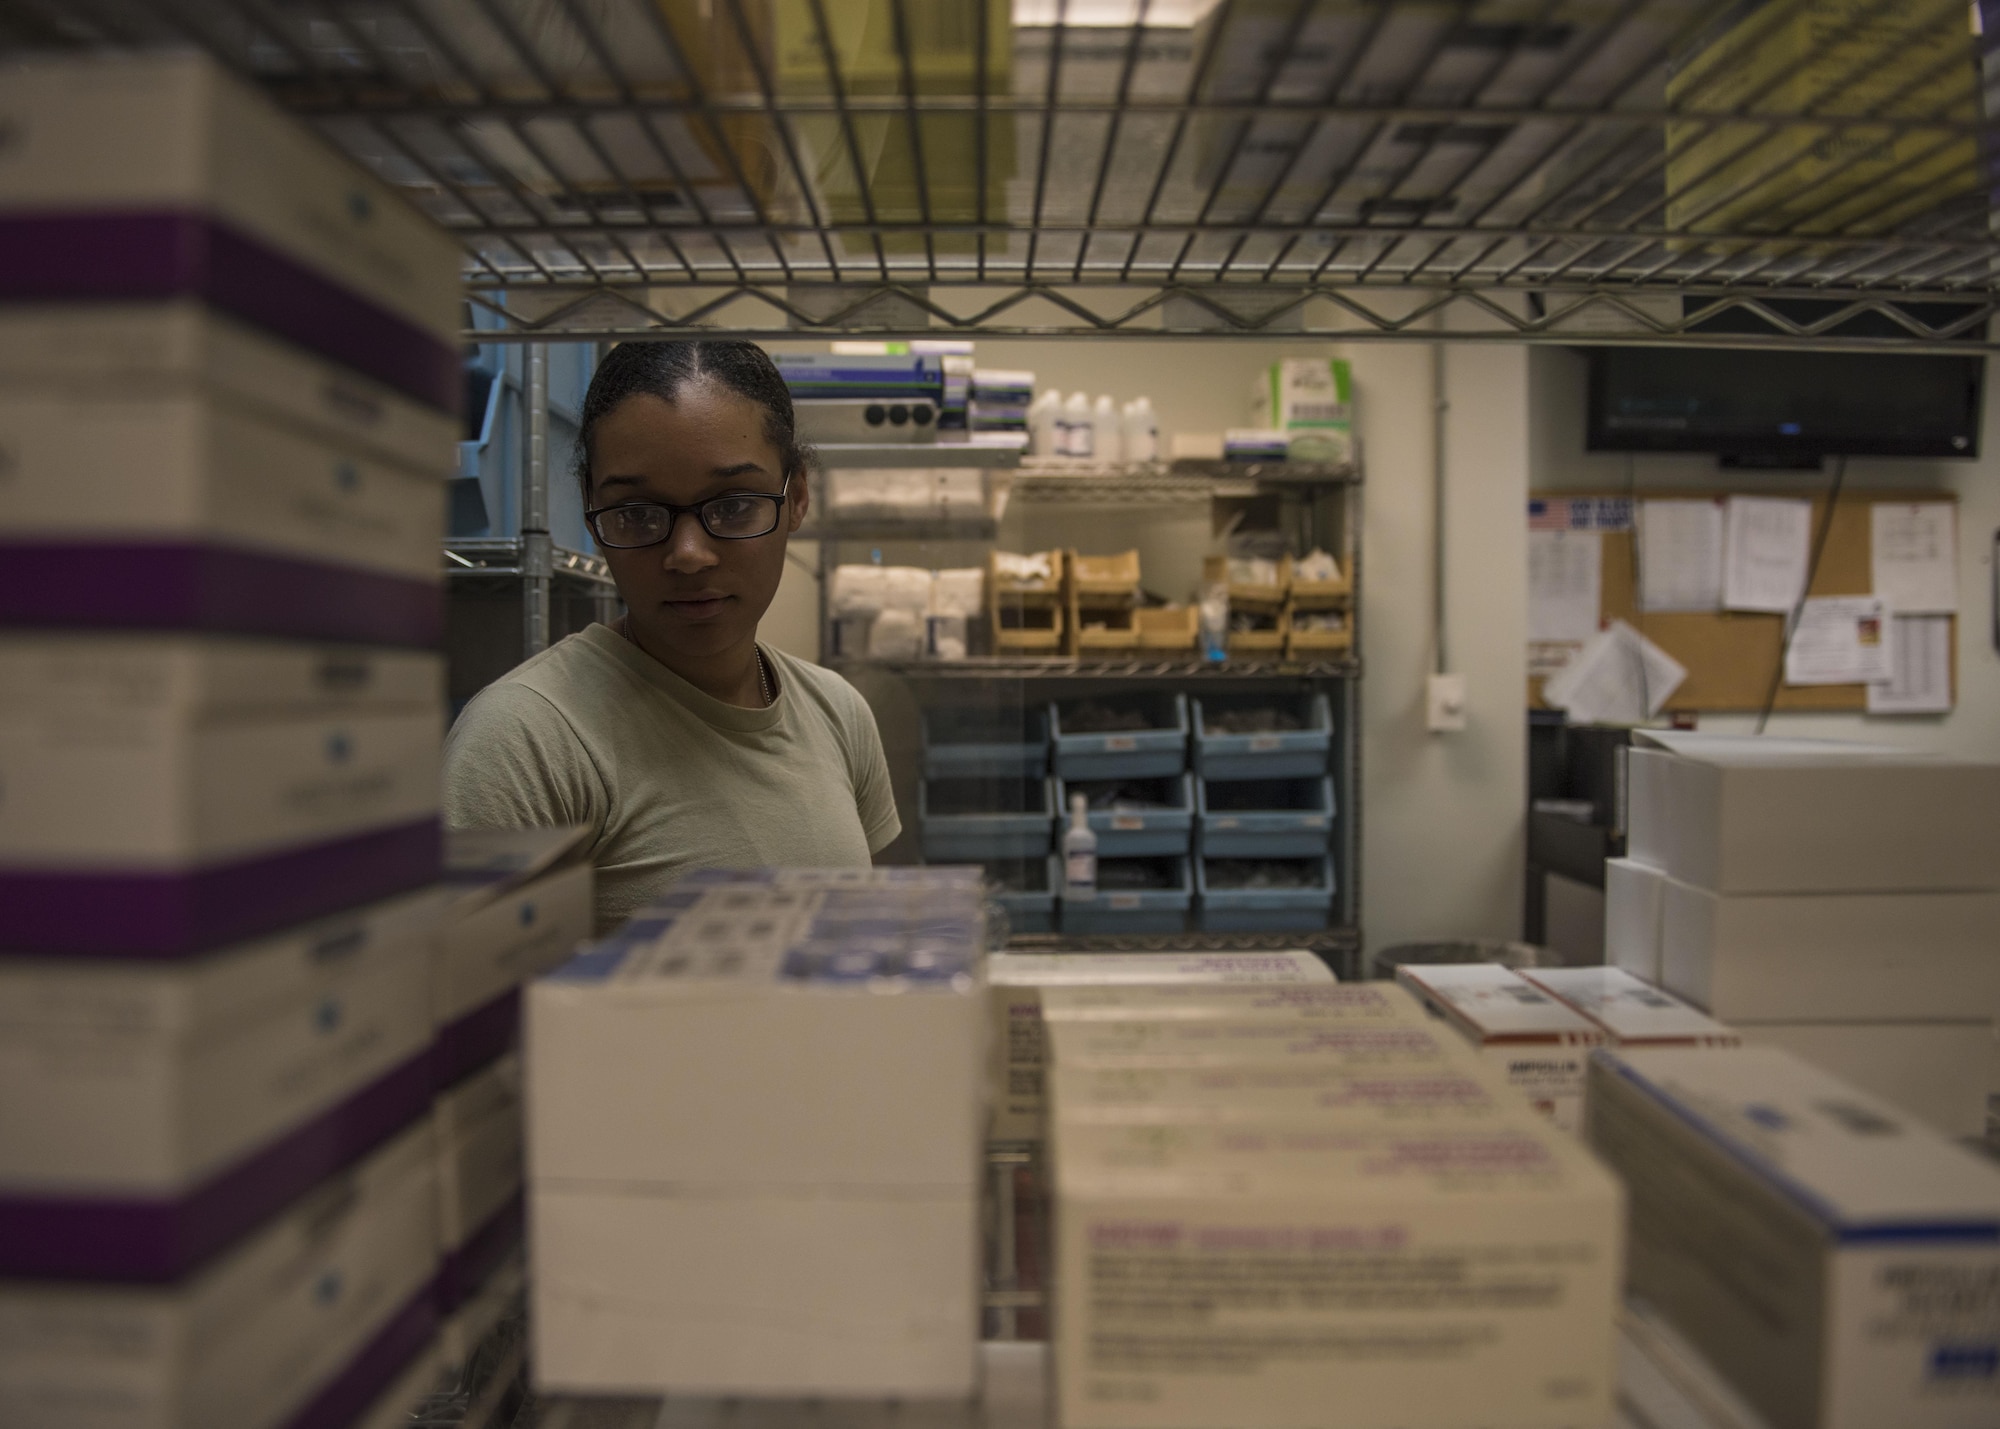 Senior Airman Latoya Kirven, 455th Expeditionary Medical Group pharmacy technician, checks expiration dates on supplies at the Craig Joint-Theater Hospital, Bagram Airfield, Afghanistan, June 06, 2016. The pharmacy checks expiration dates to keep stock up to date as well as making sure the medication is usable. (U.S. Air Force photo by Senior Airman Justyn M. Freeman)